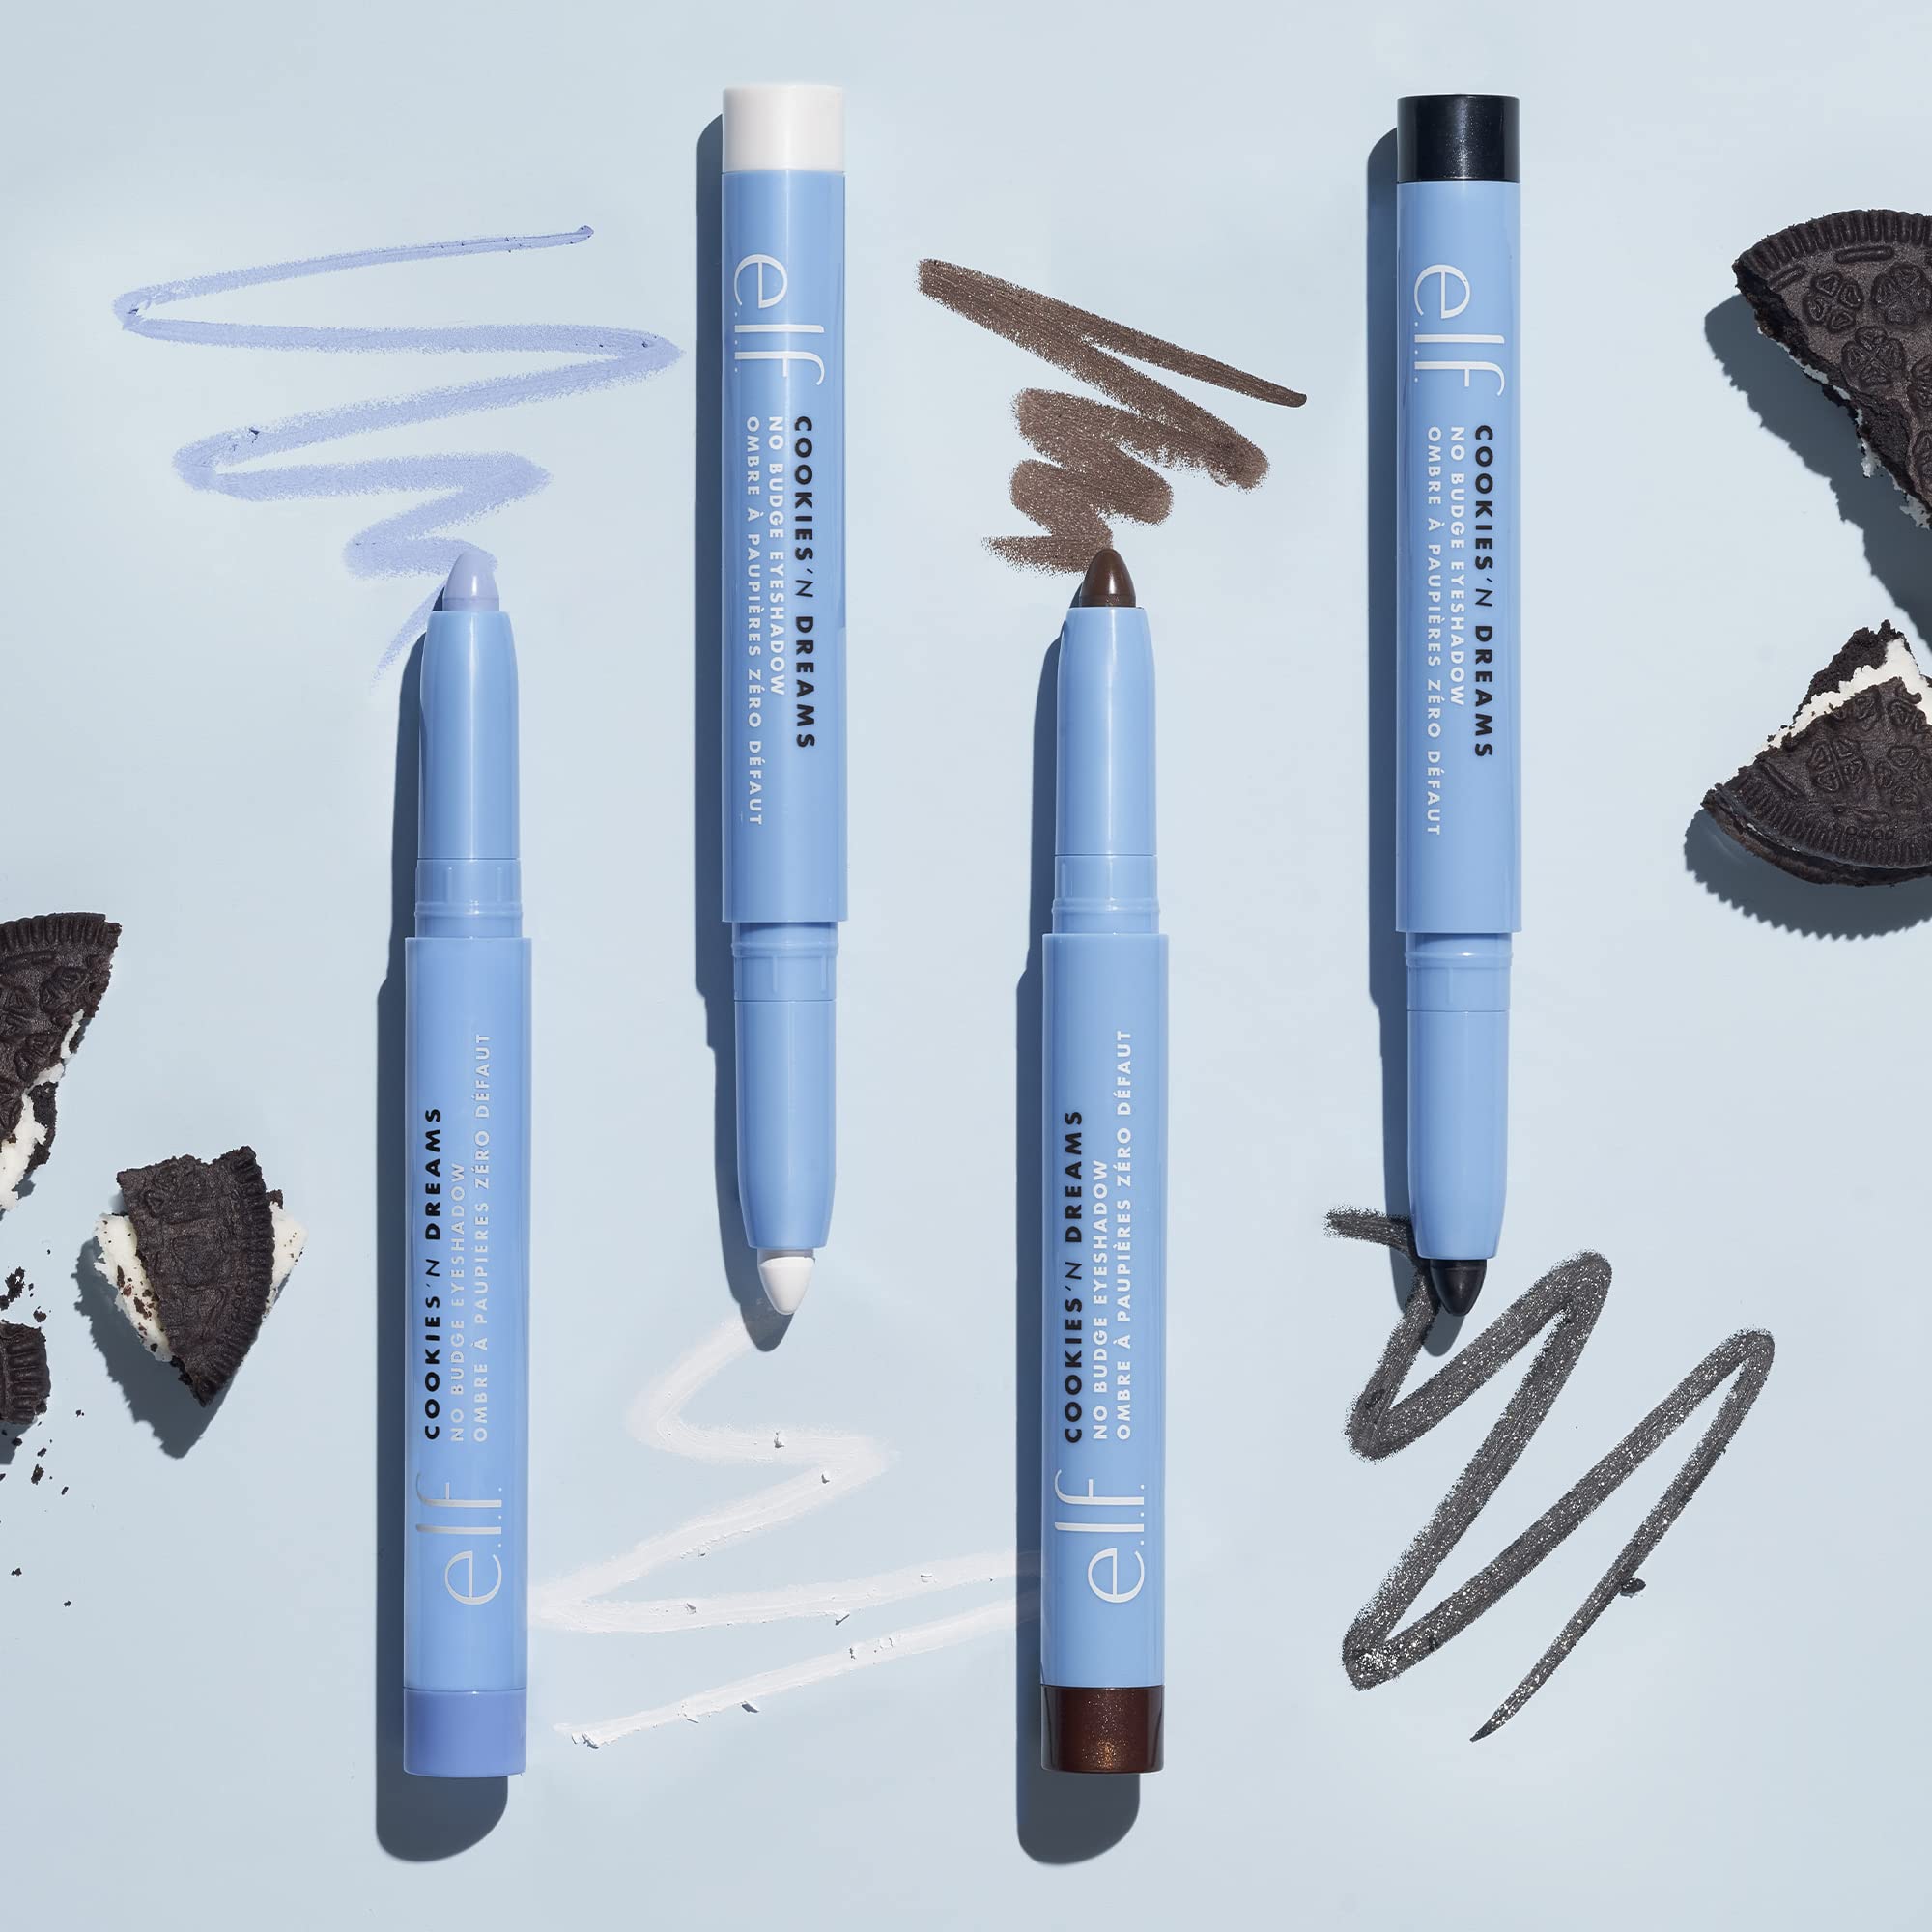 e.l.f. Cookies 'N Dreams No Budge Shadow Stick, Longwear, Smudge-Proof Eyeshadow With Built-In Sharpener, Limited Edition Shade, Sweet Cream